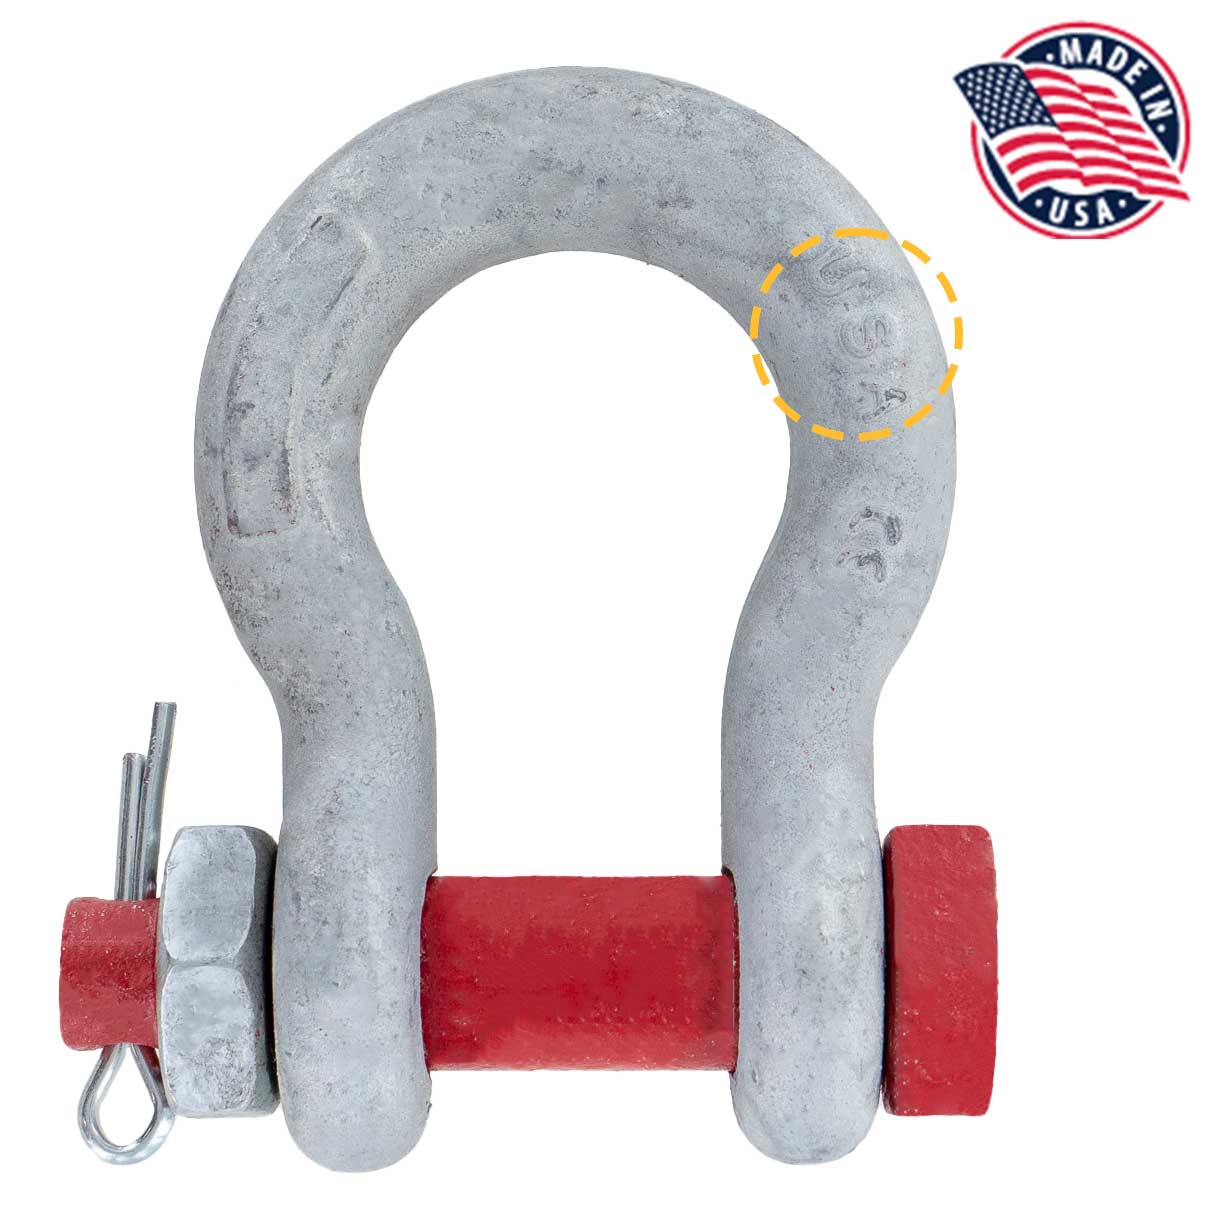 7/8" Crosby® Alloy Bolt Type Anchor Shackle | G-2140 - 9.5 Ton made in USA